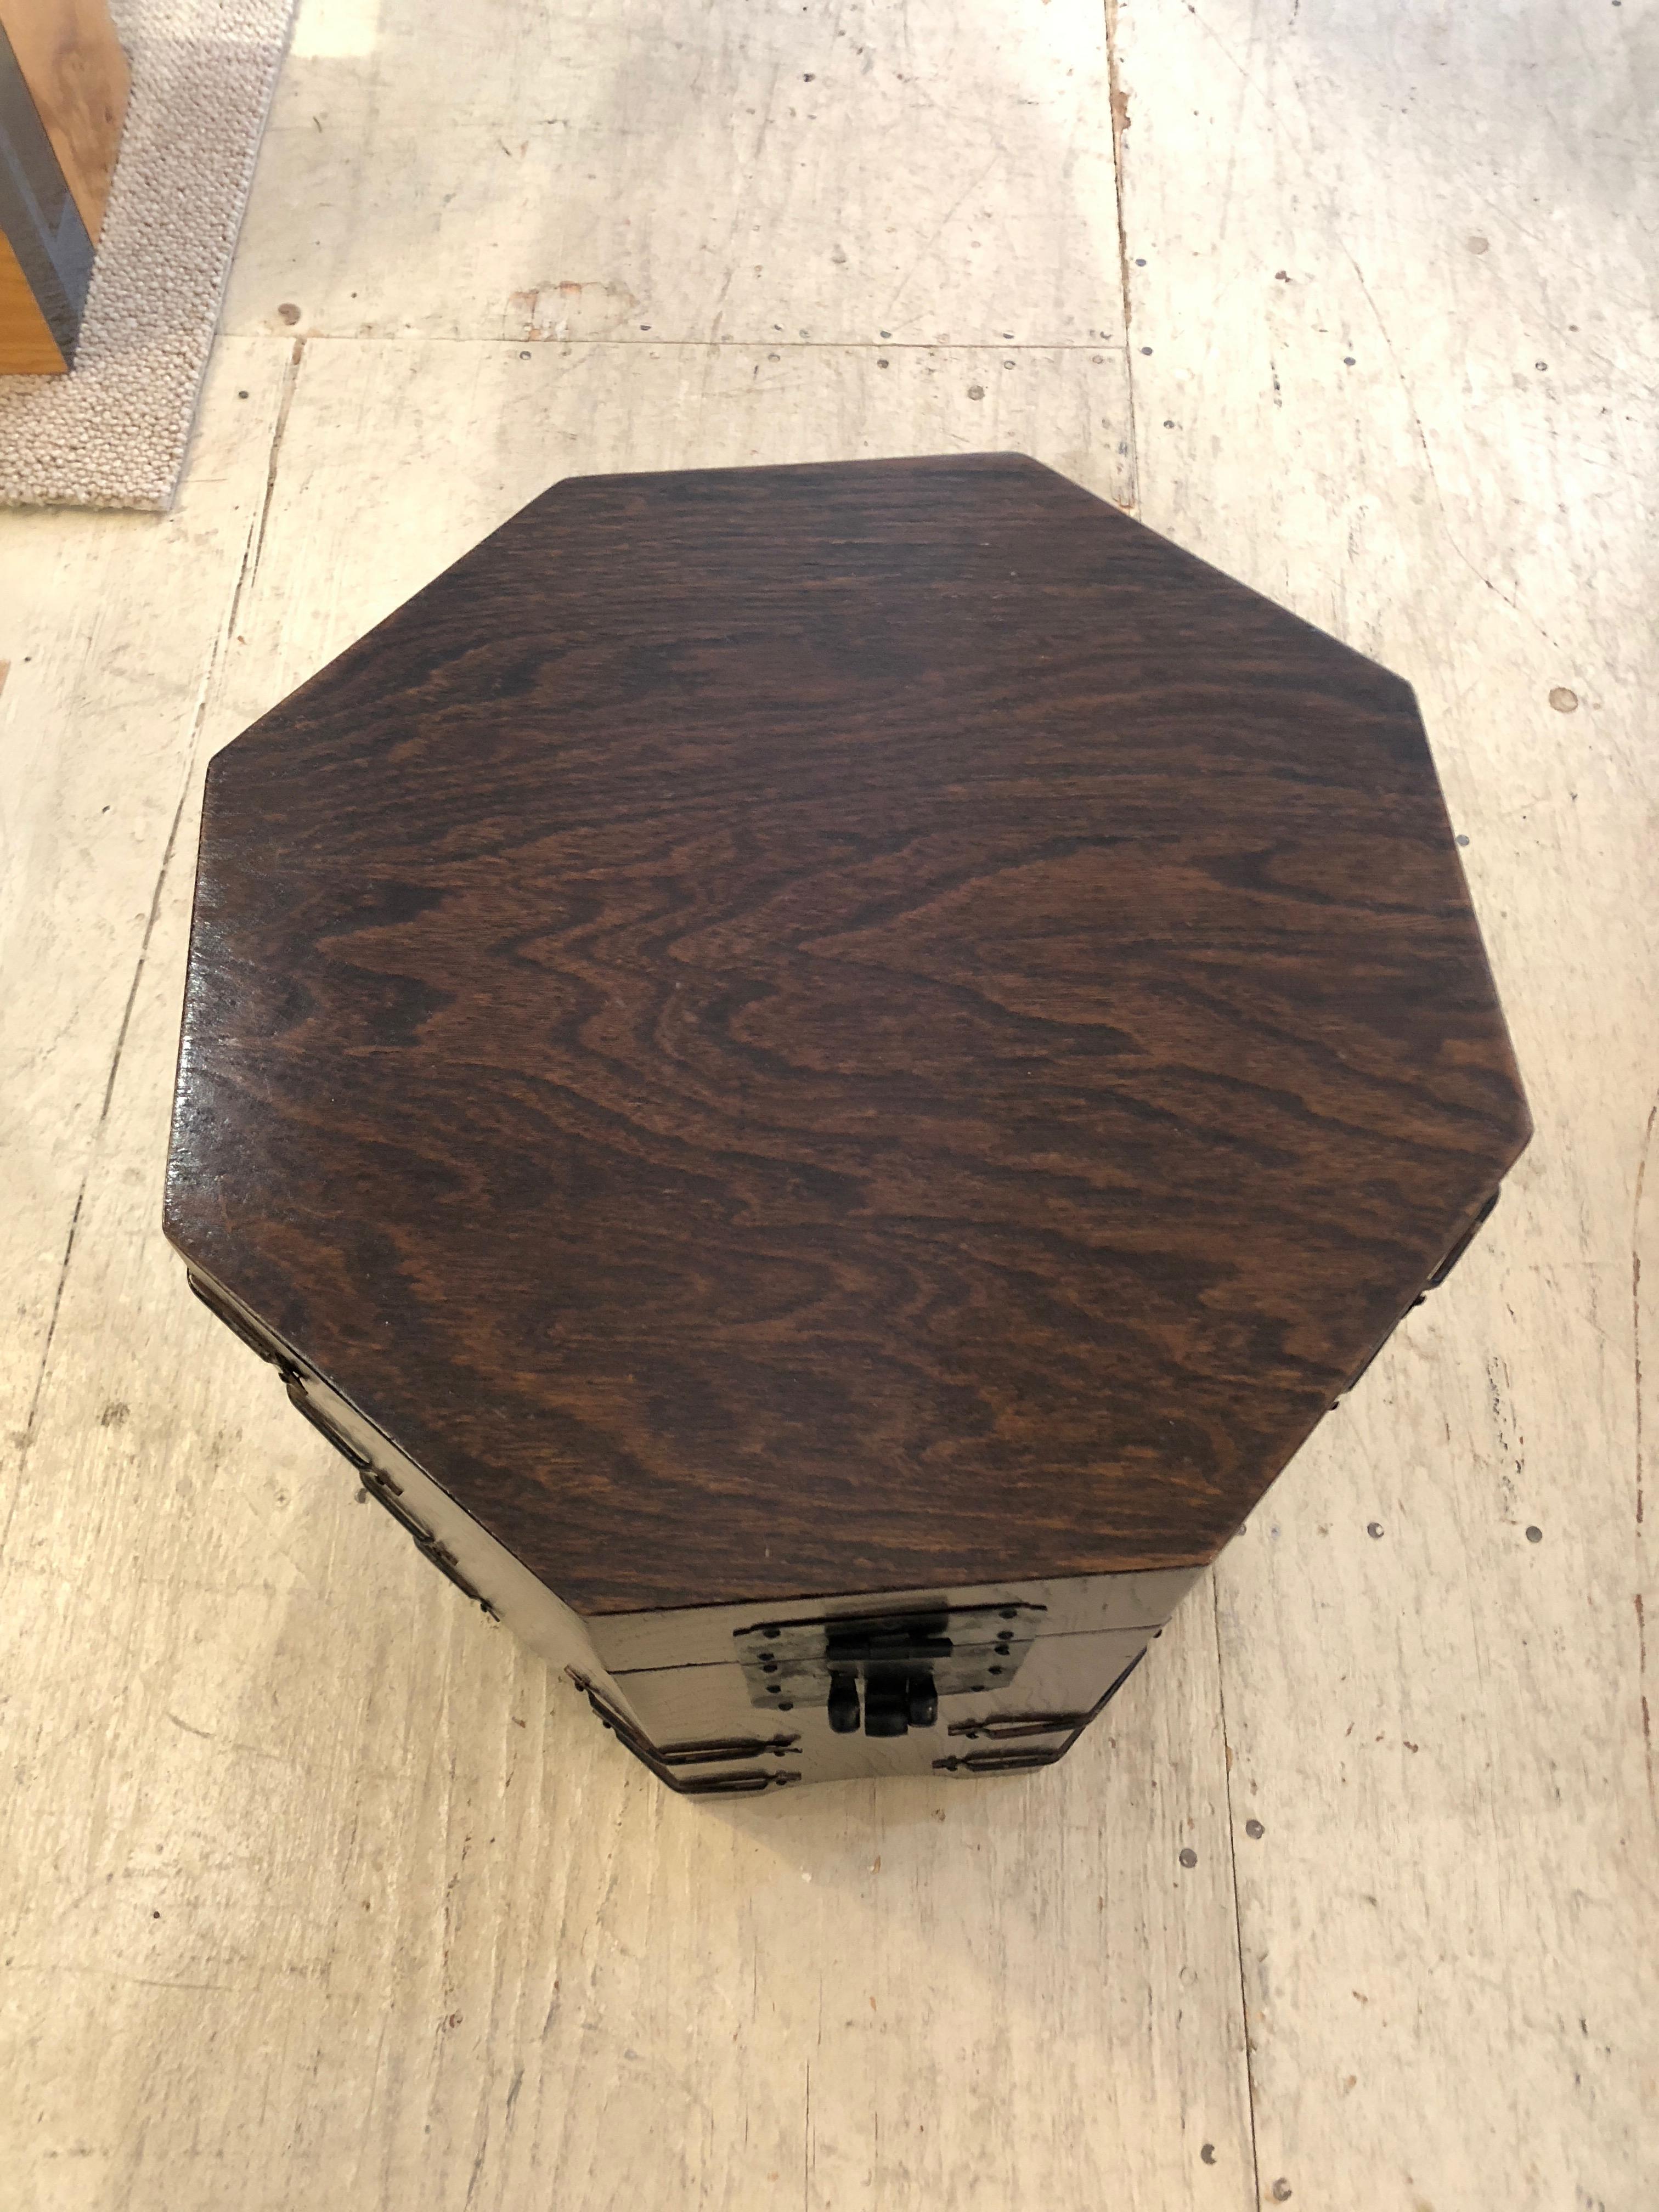 A masculine octagonal oak end table chest that opens to reveal storage inside and is decorated with black iron around the periphery and latch.